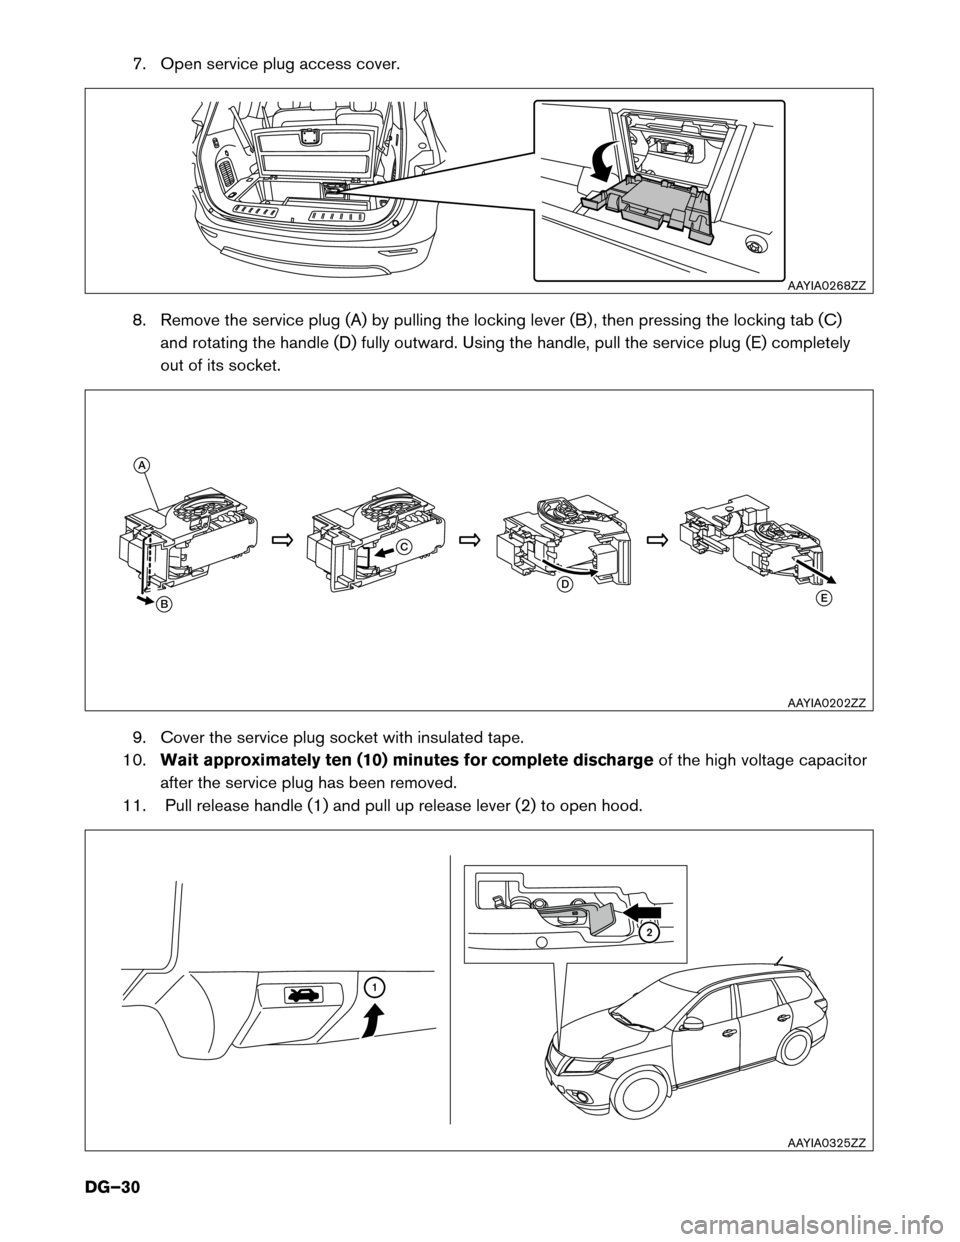 NISSAN PATHFINDER HYBRID 2014 R52 / 4.G Dismantling Guide 7. Open service plug access cover. 
8. Remove the service plug (A) by pulling the locking lever (B) , then pressing the locking tab (C)and rotating the handle (D) fully outward. Using the handle, pull